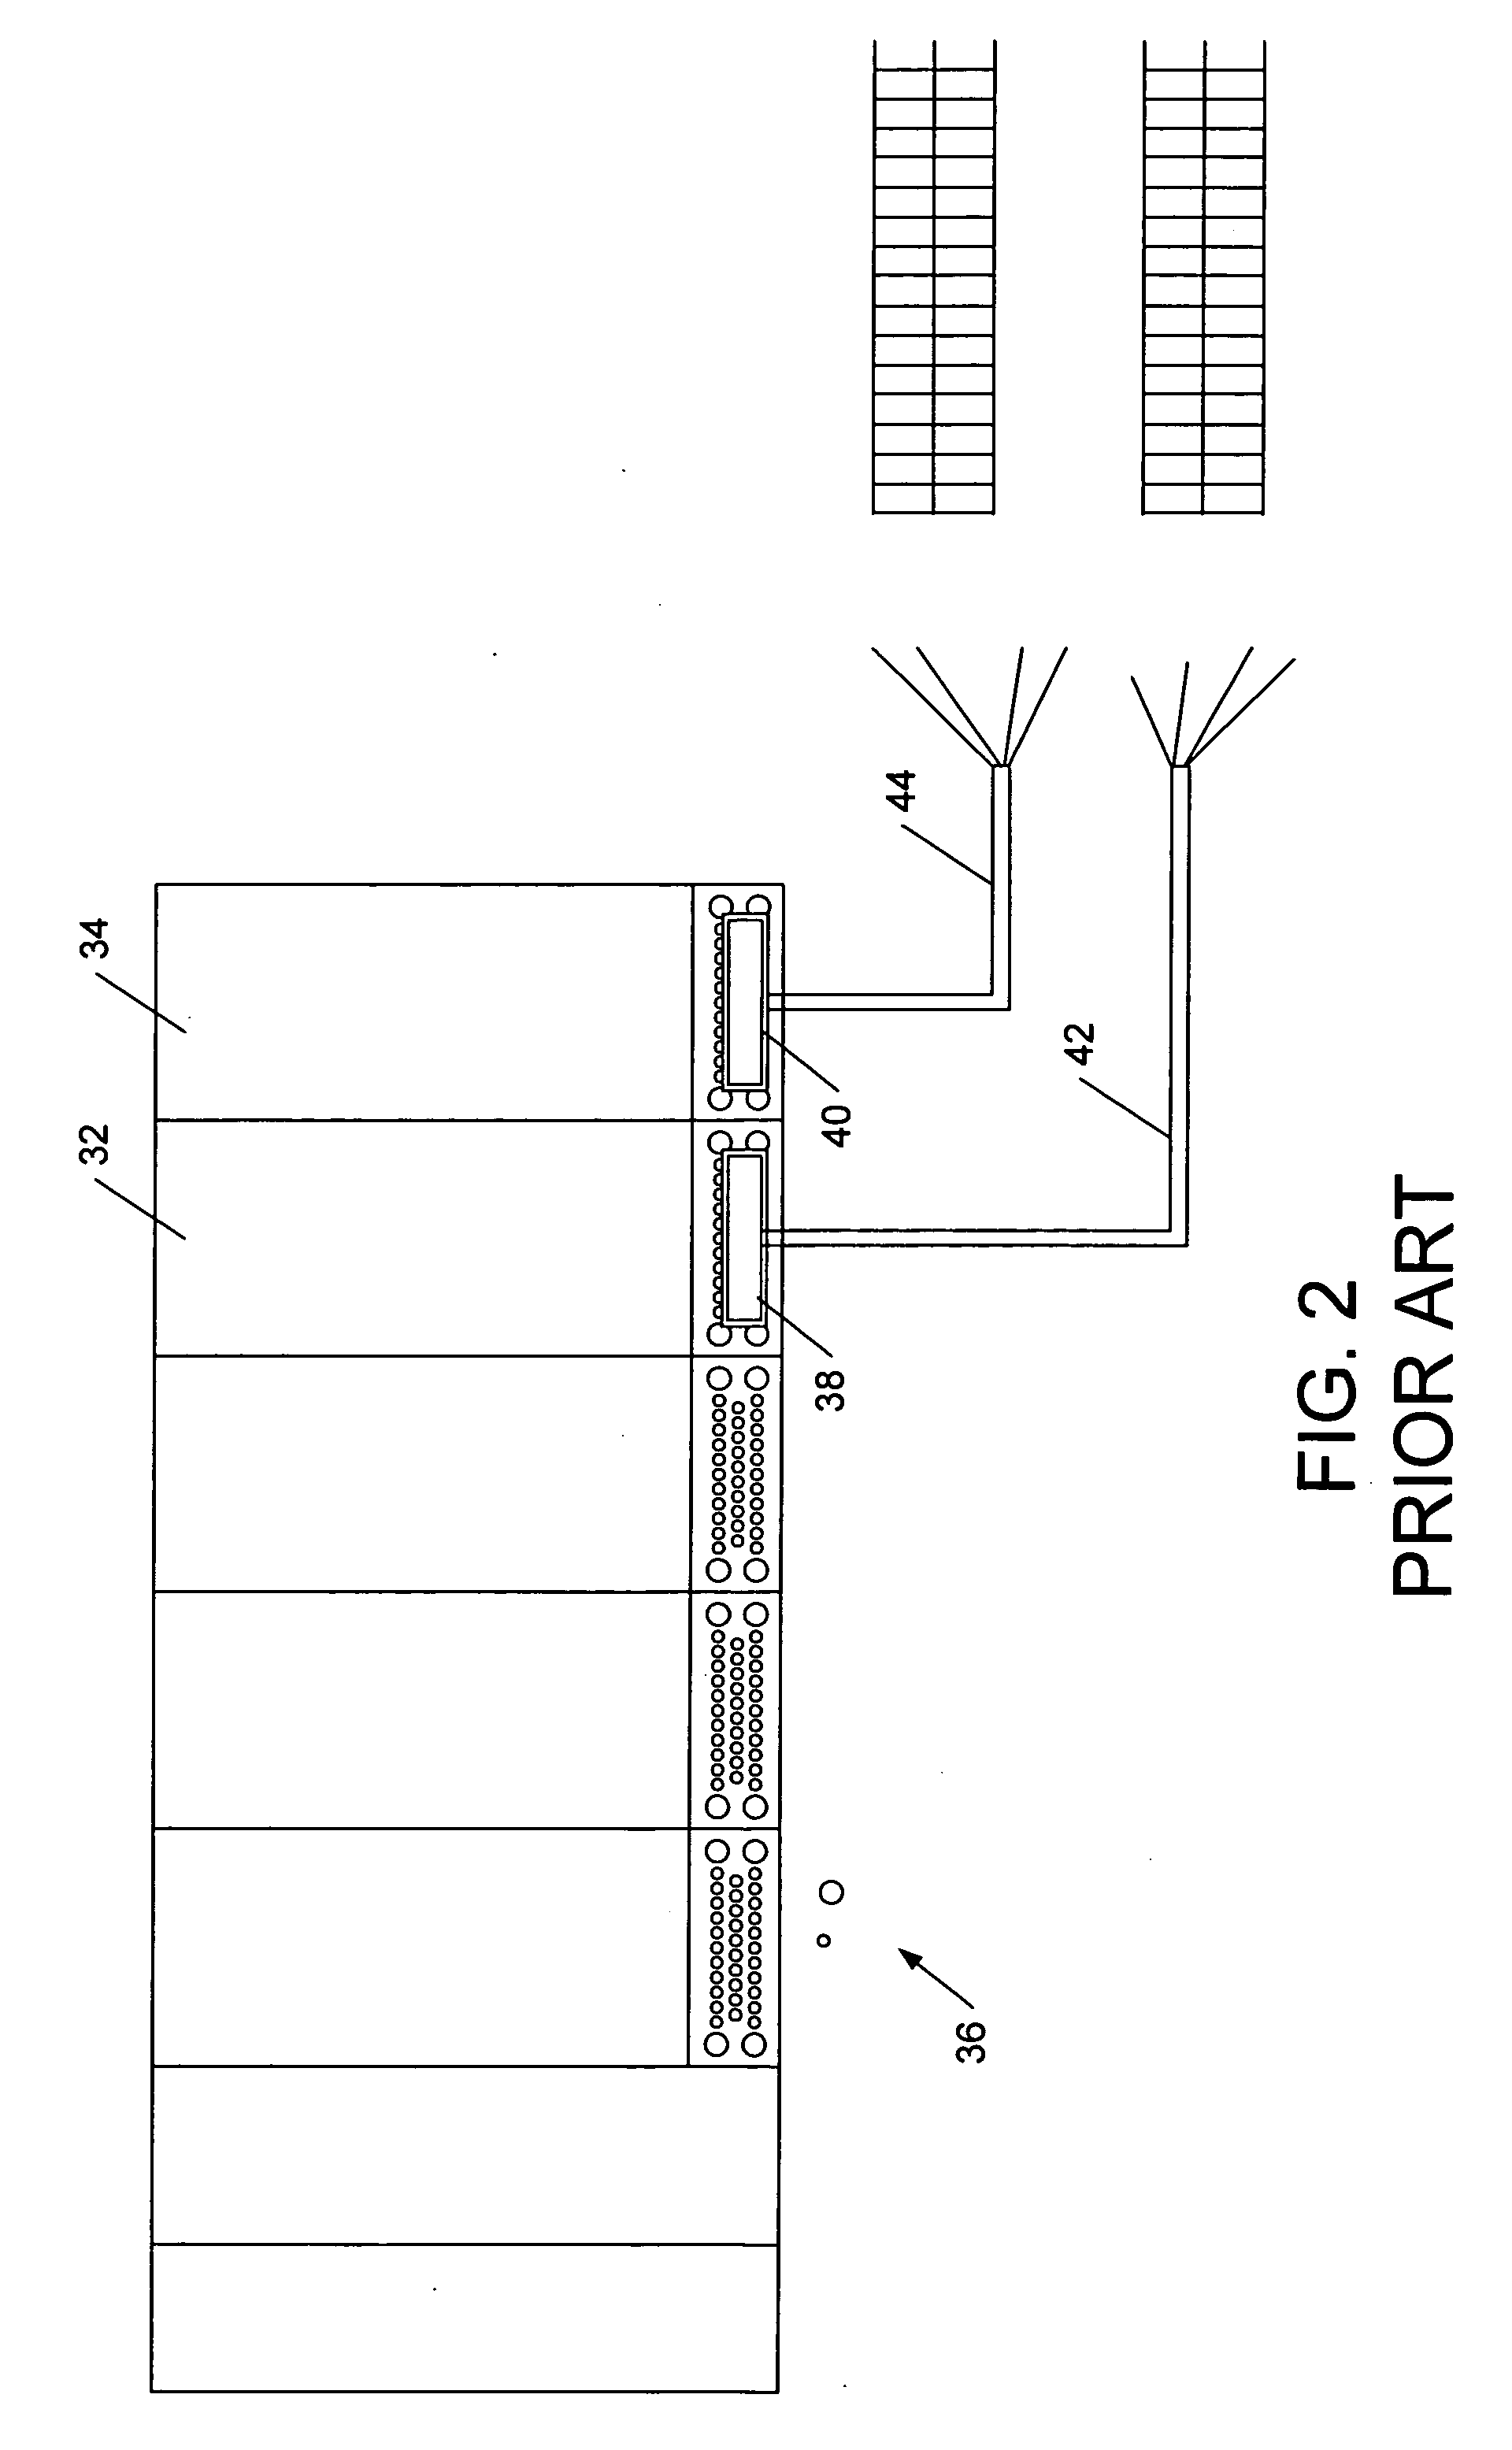 System for programmed control of signal input and output to and from cable conductors